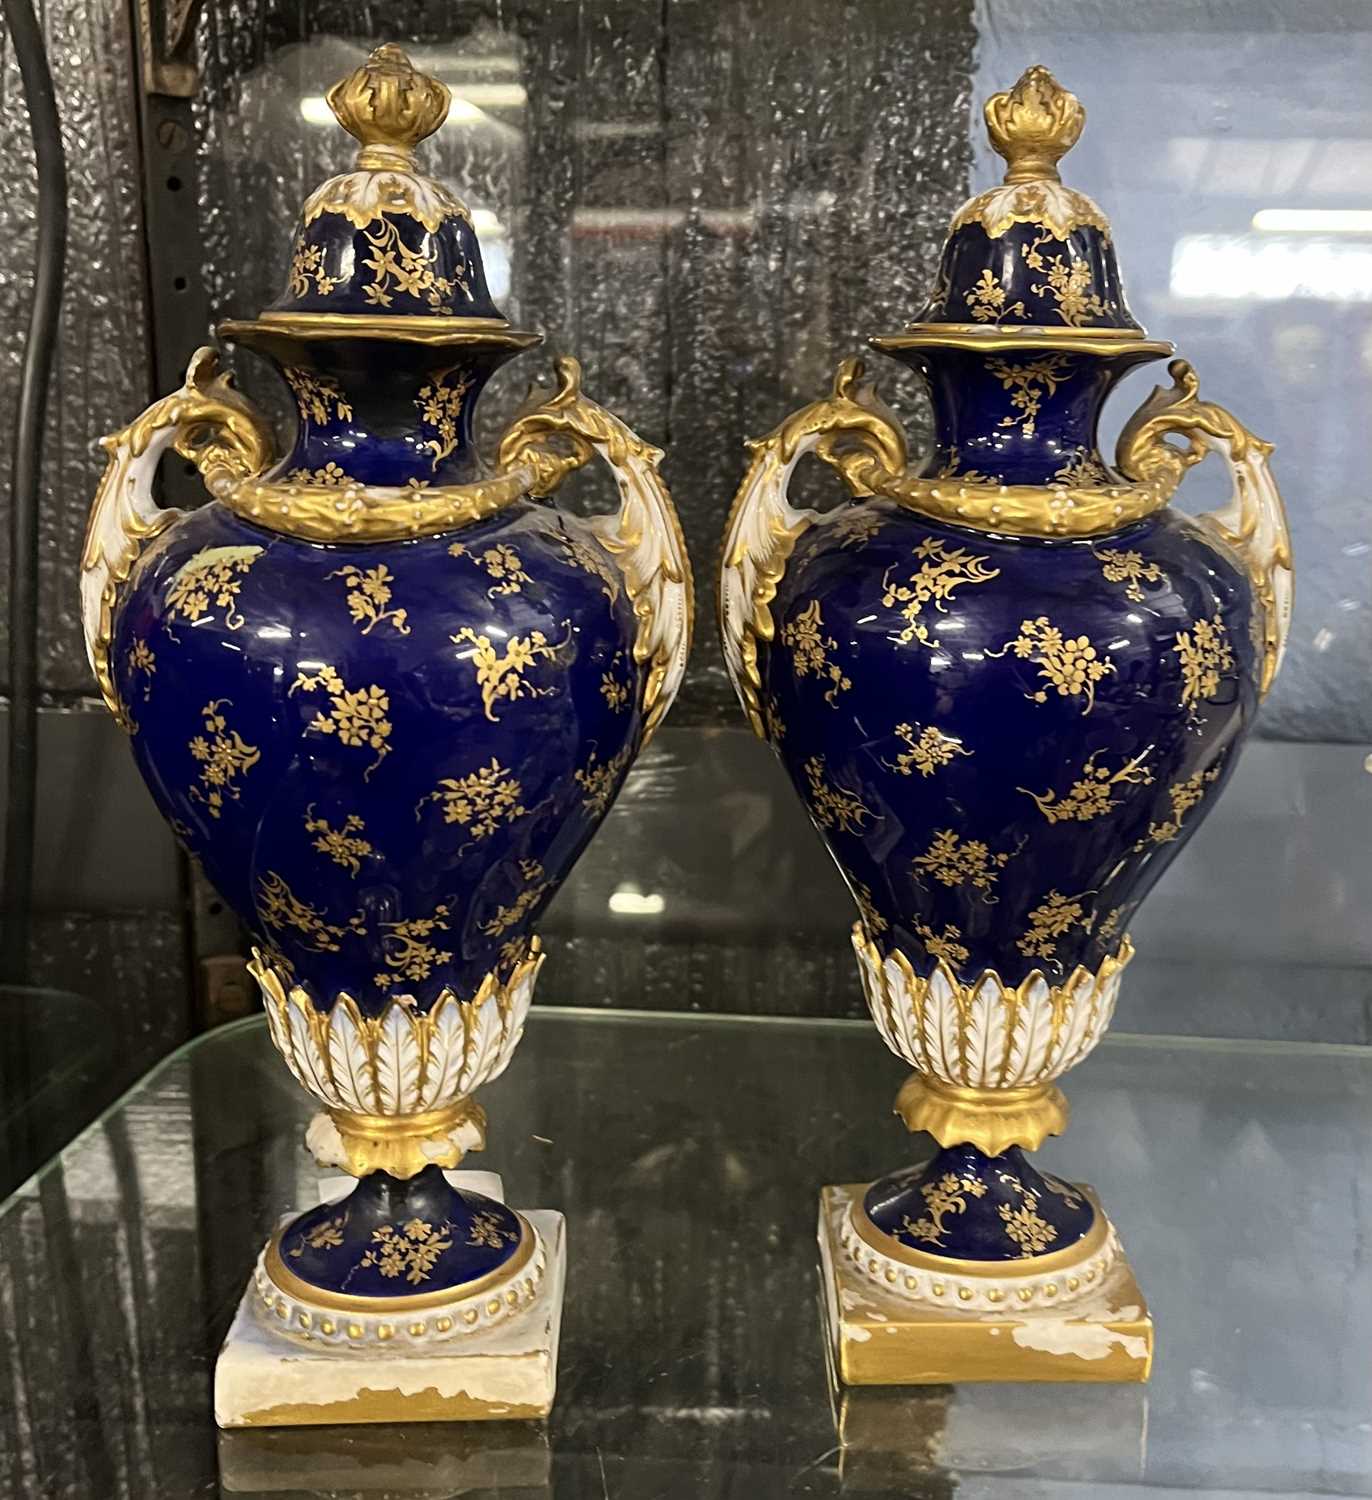 Royal Worcester Fruit Vases by Chivers - Image 10 of 16